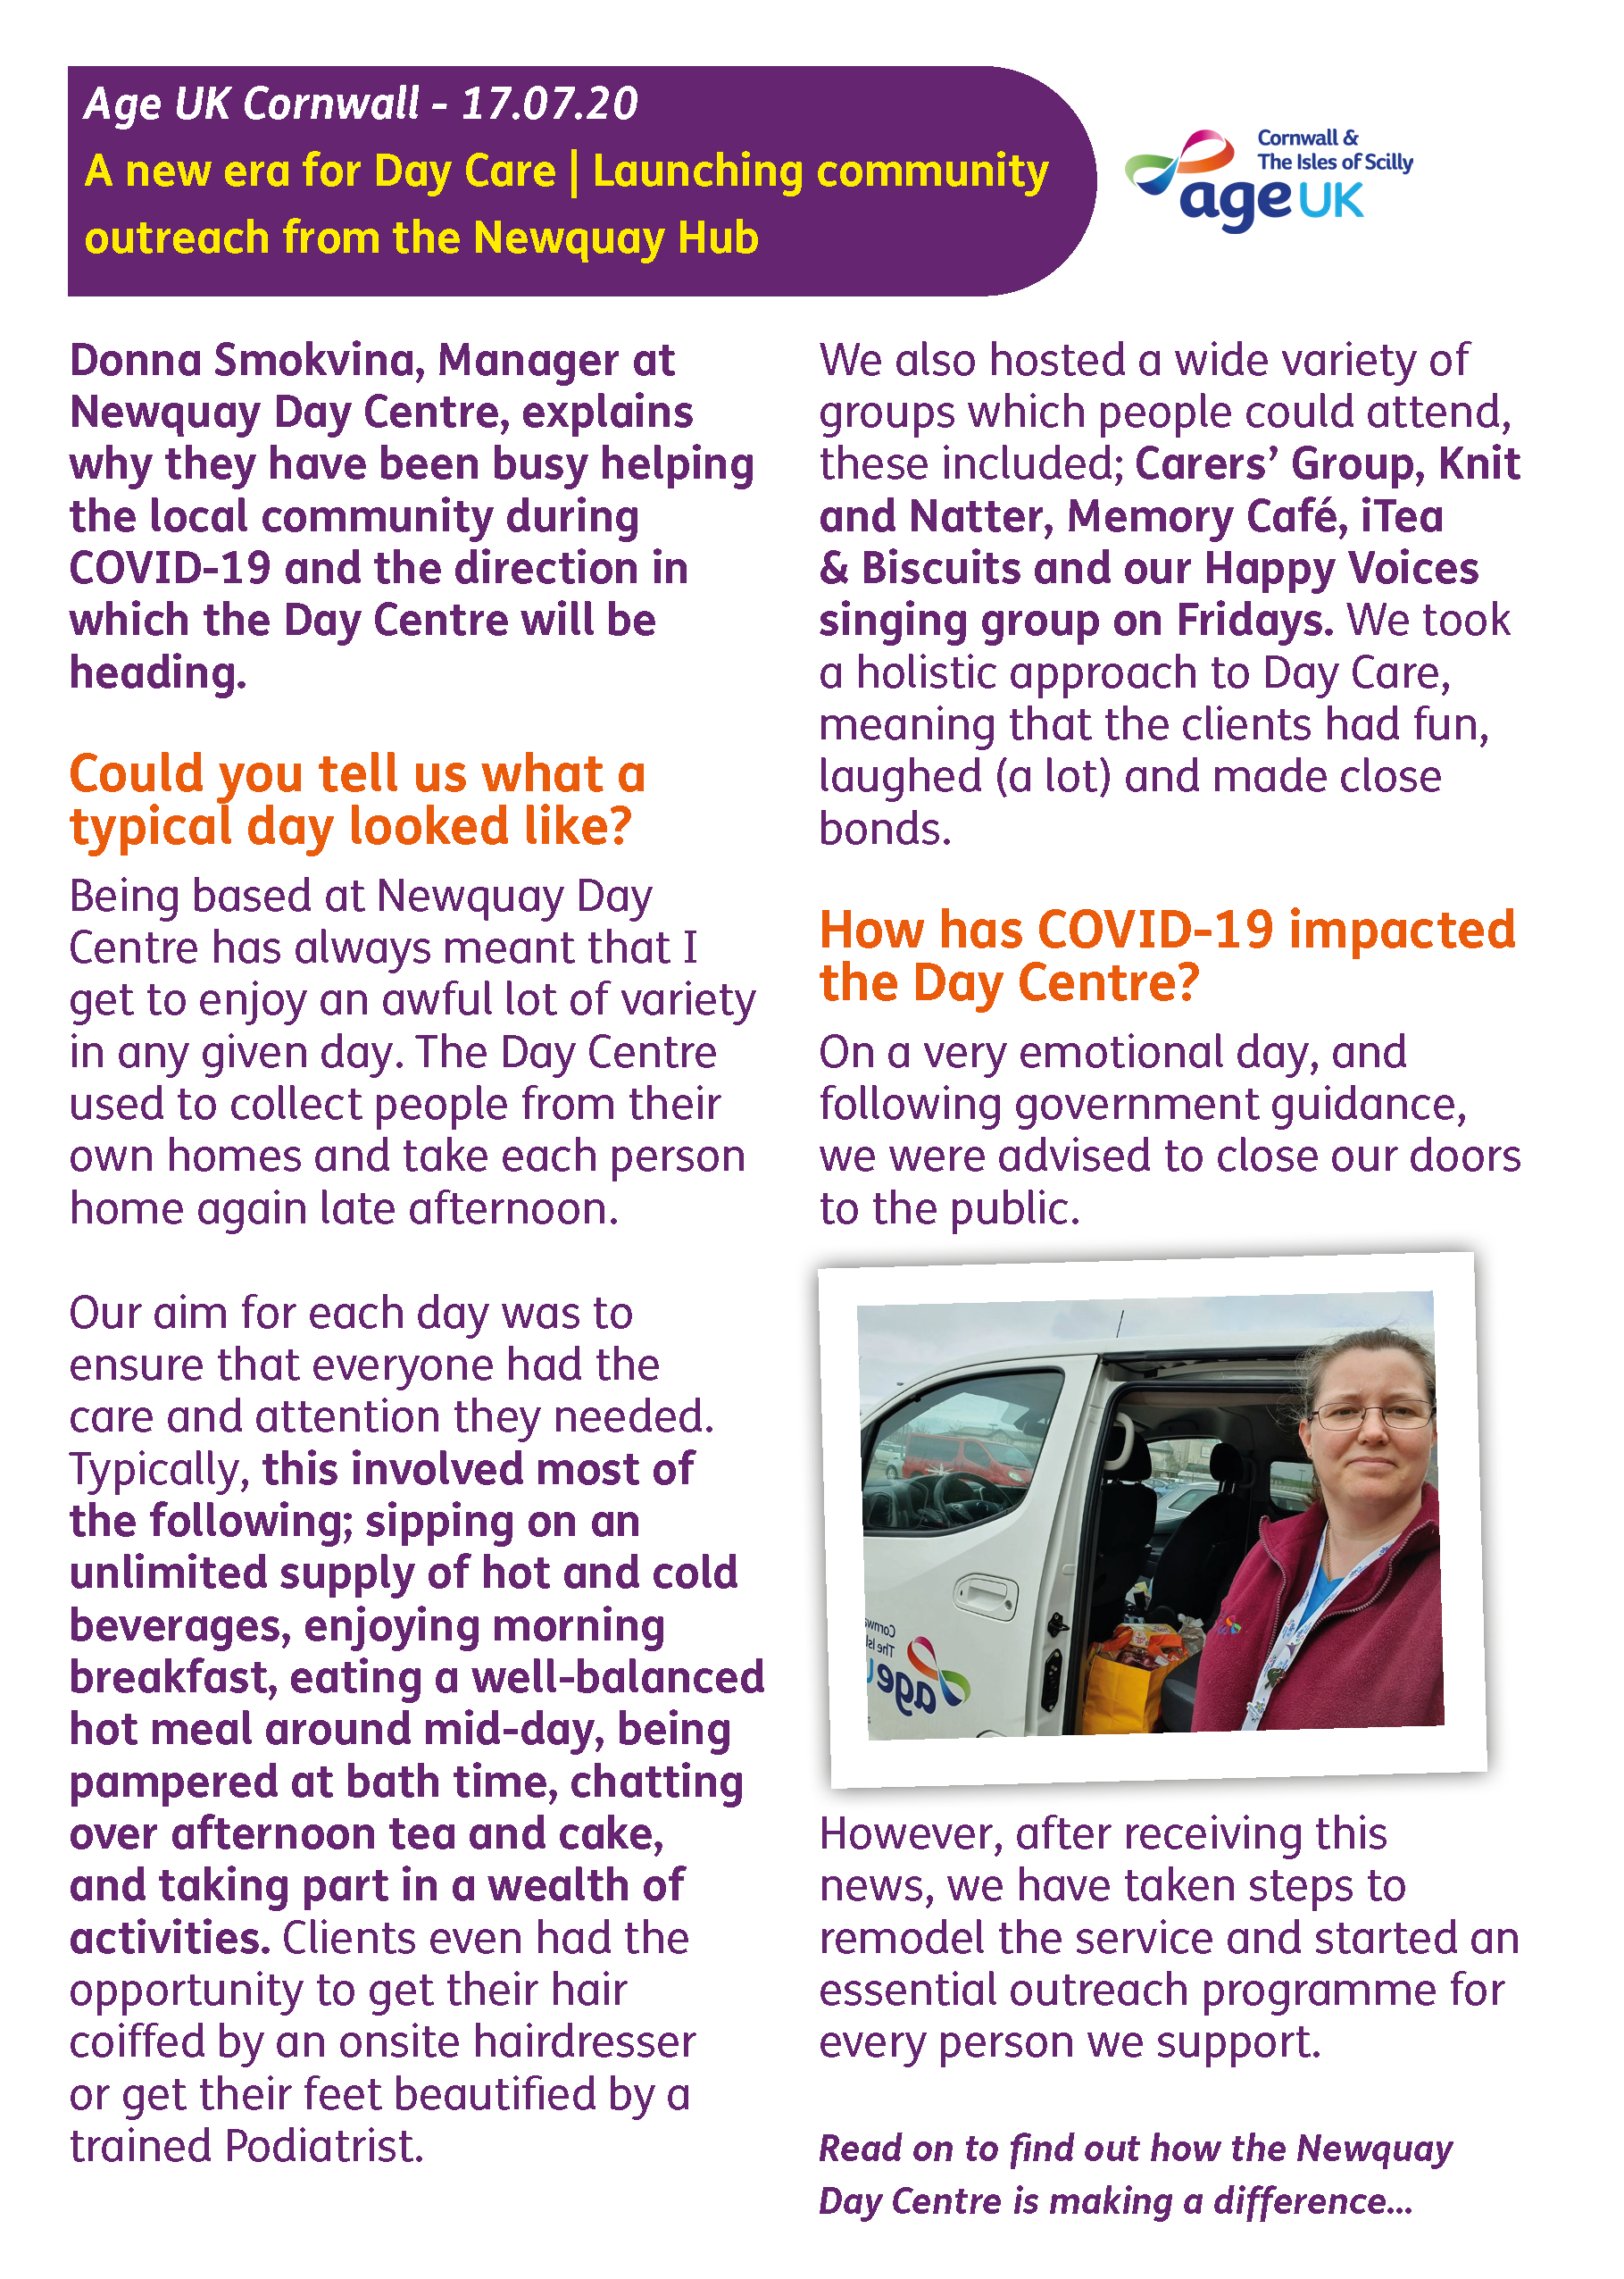 170720 - A new era for Day Care - Community outreach and support (Newquay Community Hub - A new era)_Page_1.png